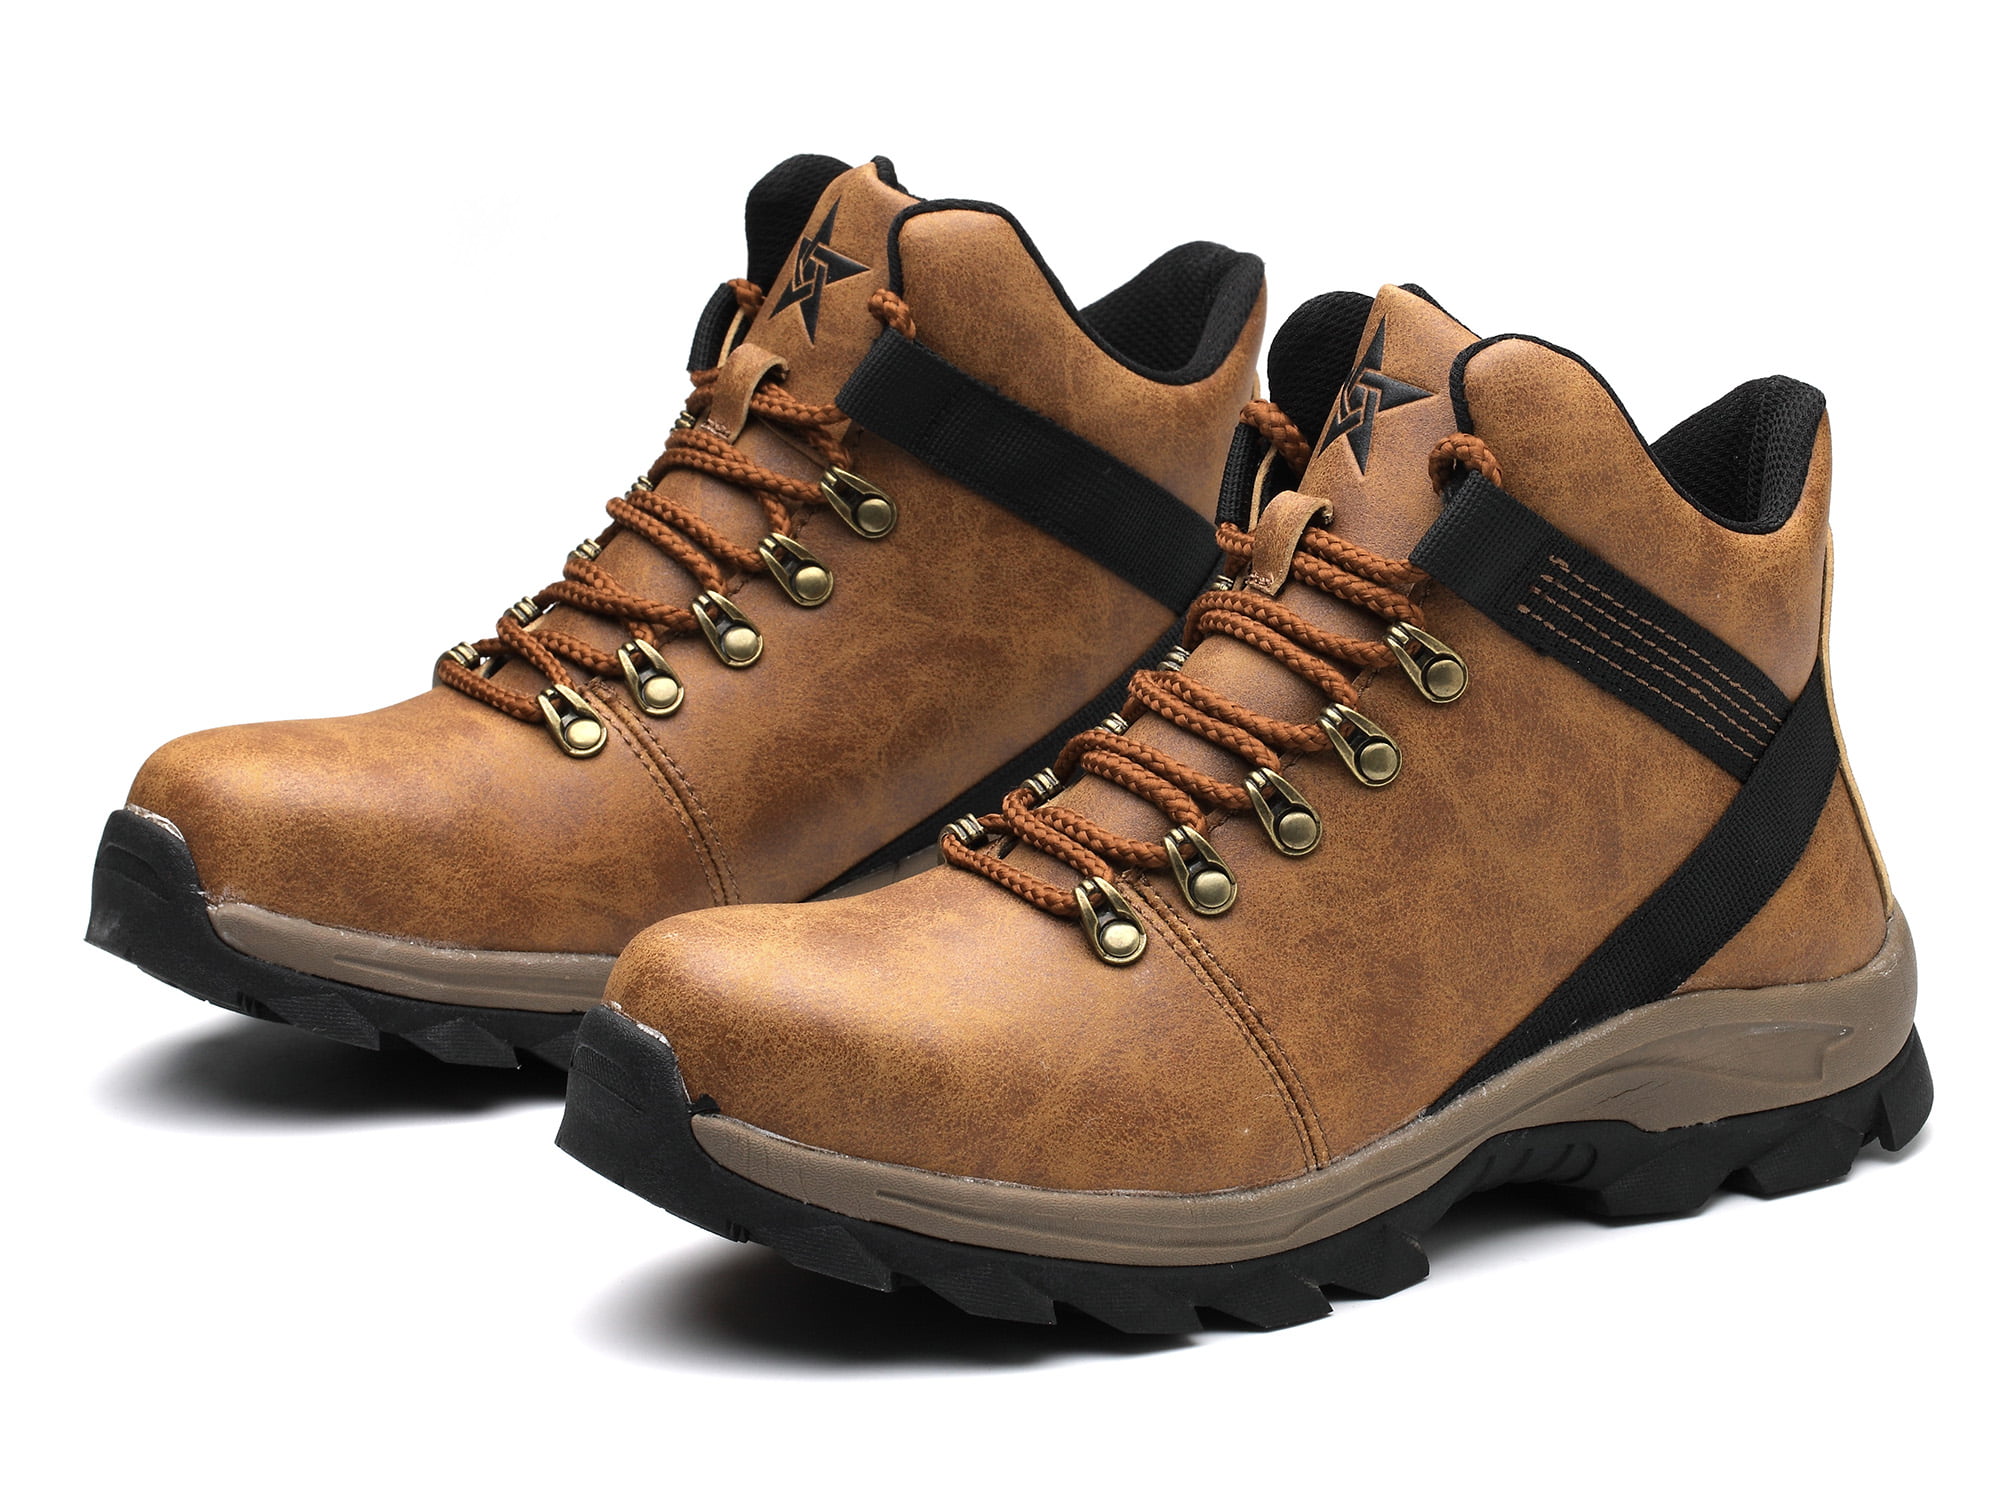 Mens Leather Work Safety Indestructible Shoes Steel Toe Waterproof Midsole Boots 